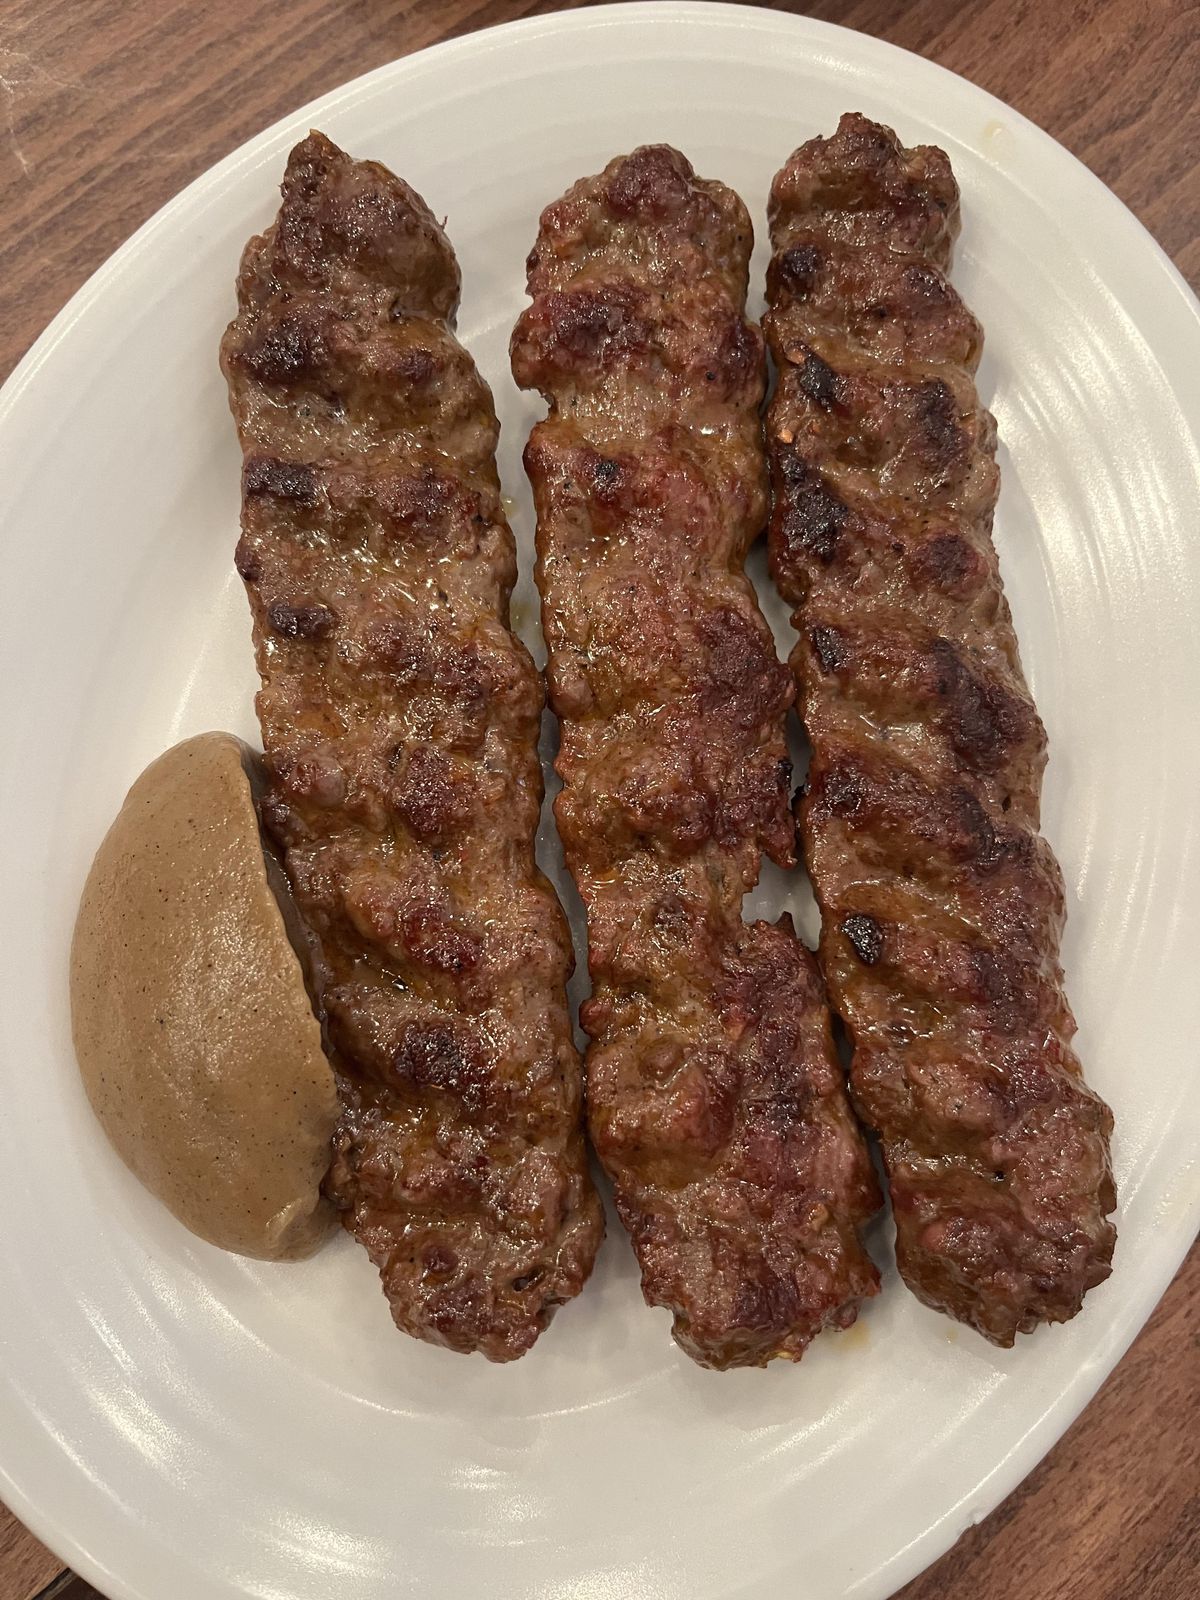 A dollop of grilled apple sauce next to three brown grilled kofte on a white plate, on top of a wooden table.